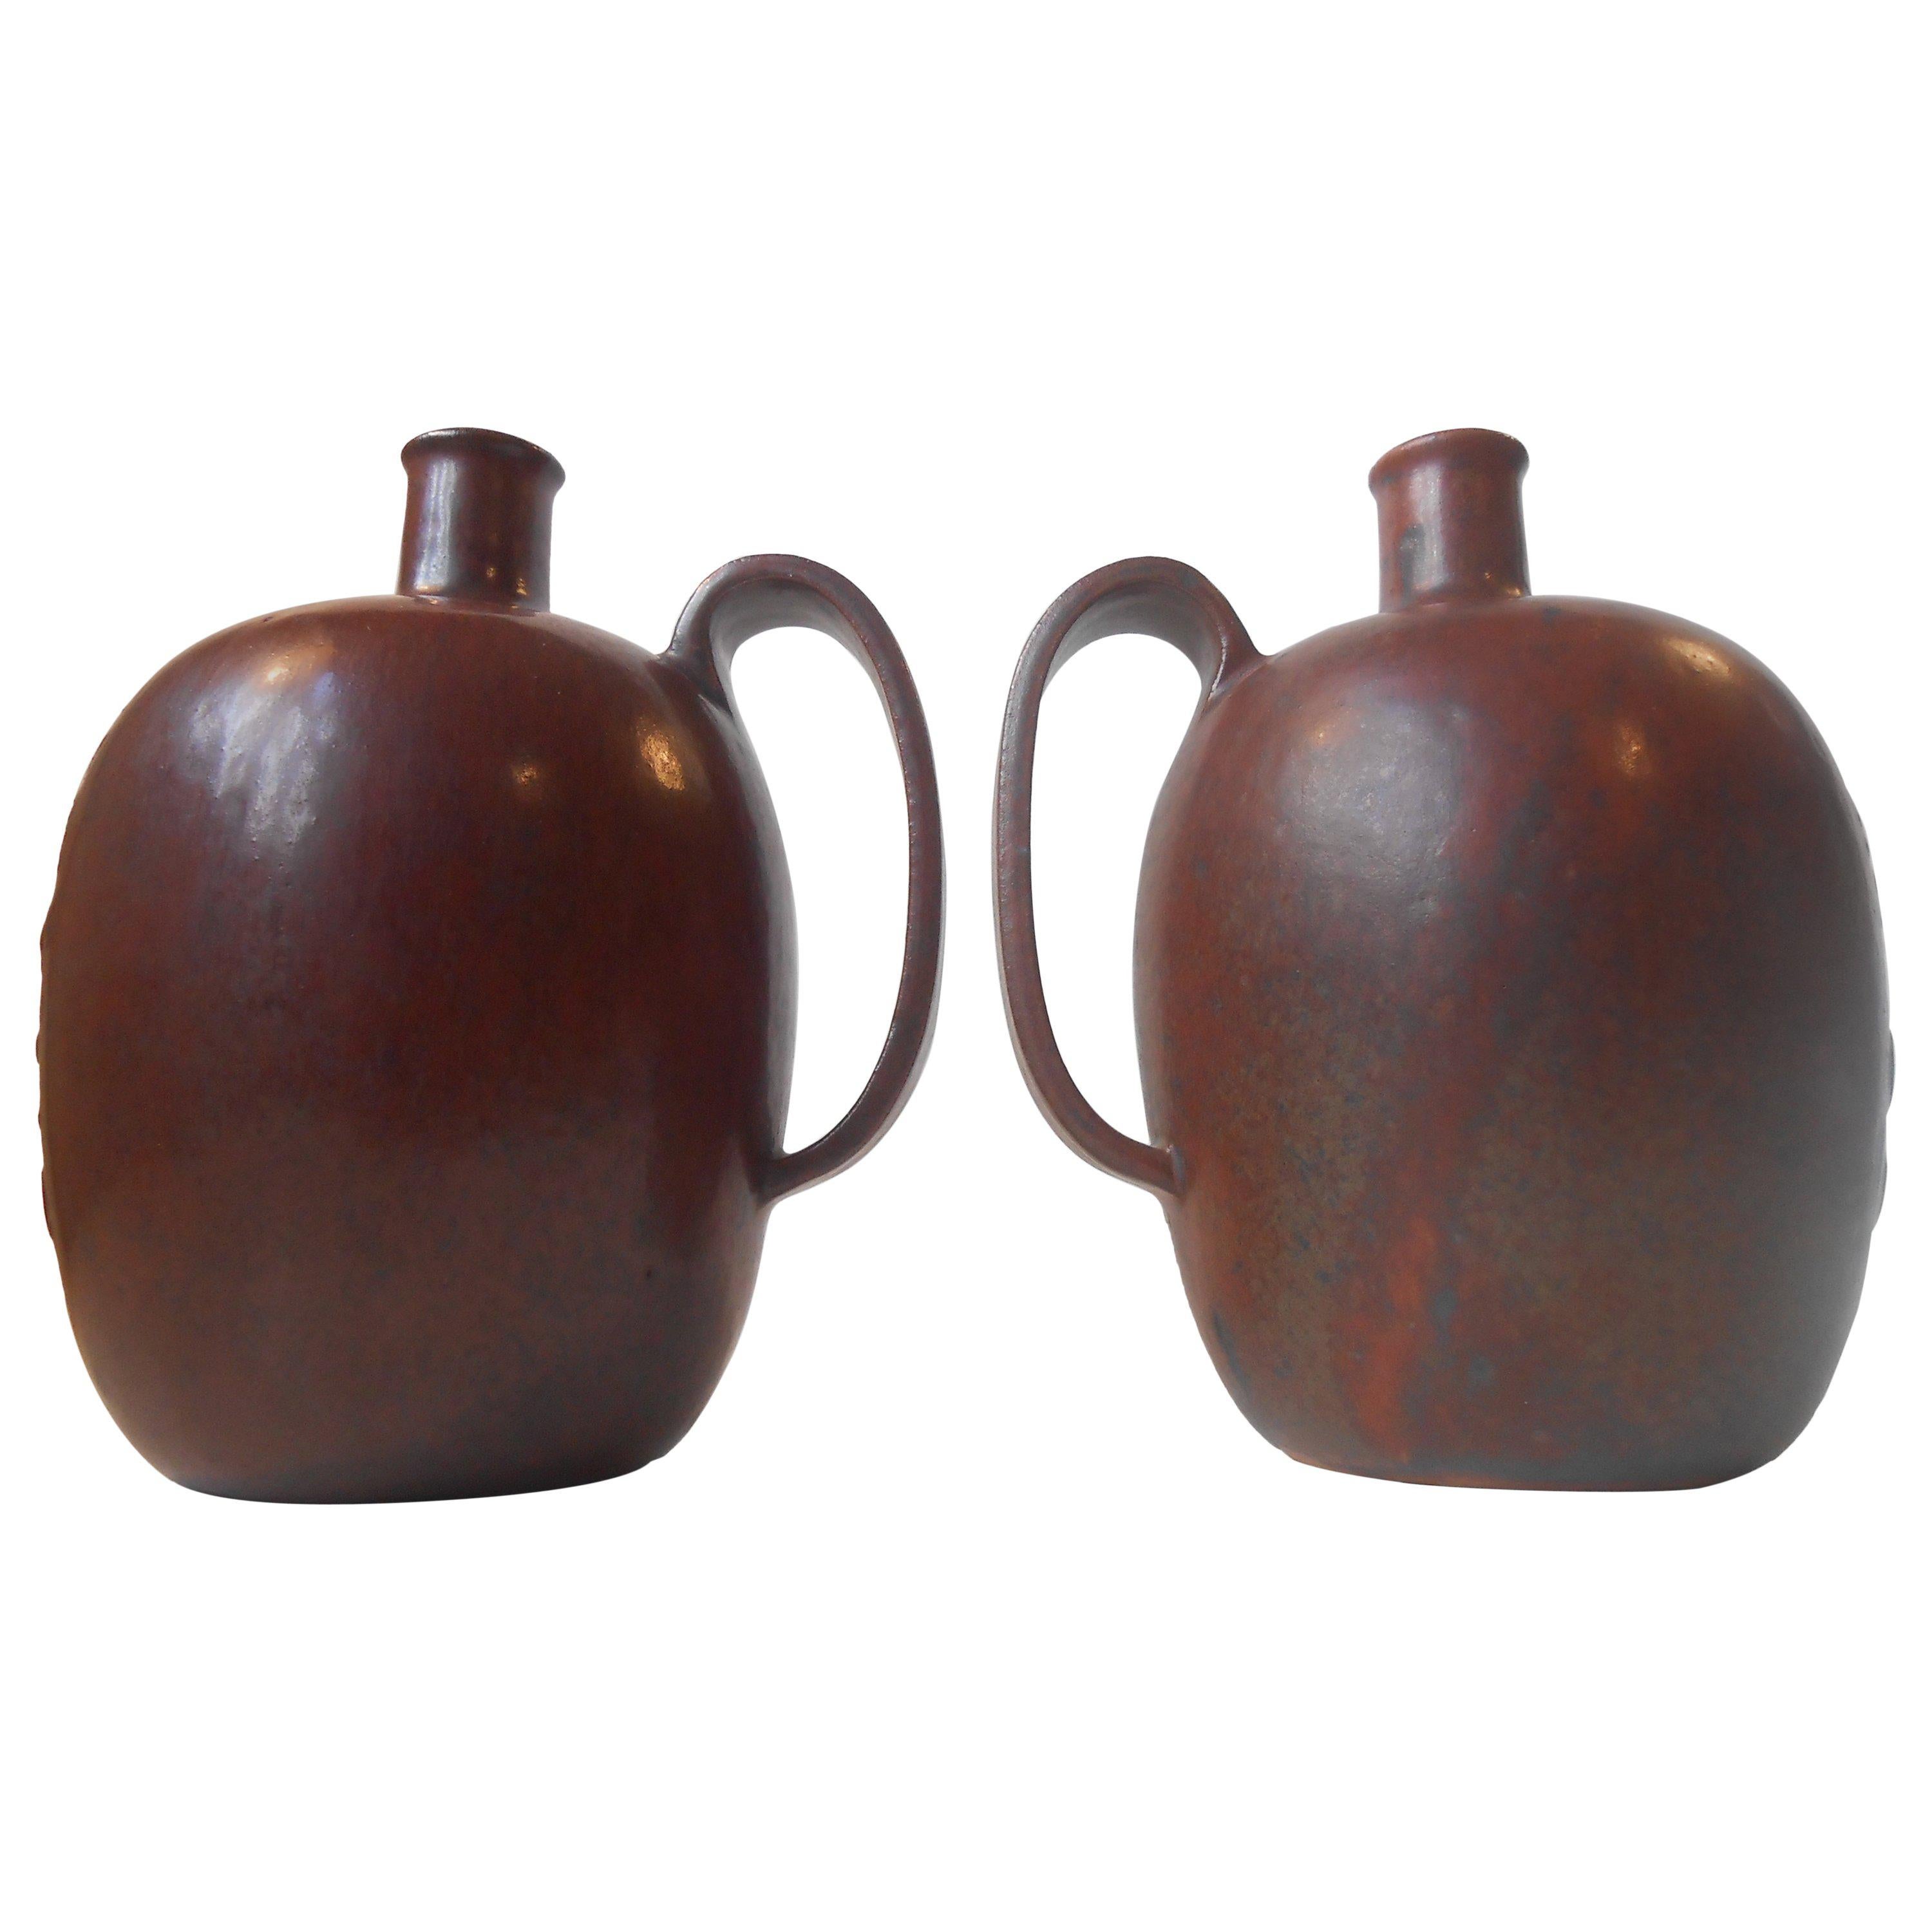 Pair of organically shaped matching Arne Bang Cloc. Chocolate liquor bottles / vases with rich red sung glazes. Both in mint condition. Measures: Height 6 inches (15 cm), diameter approximately 4 inches (10-11 cm). Both has the monogram of Arne Bang